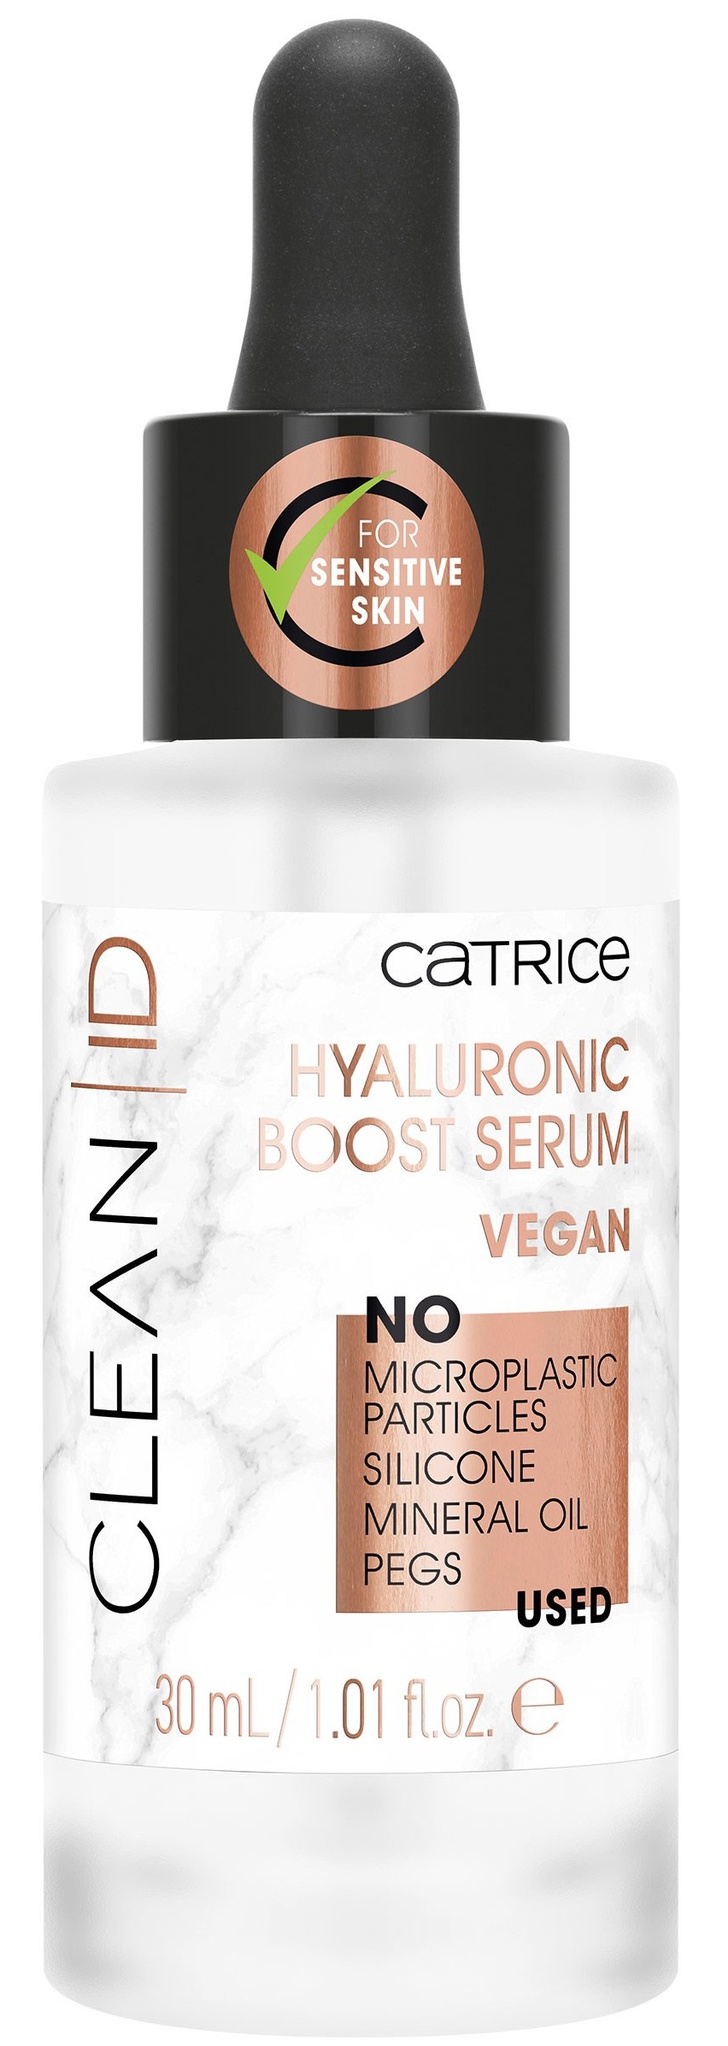 Catrice Clean Id Hyaluronic Boost Serum